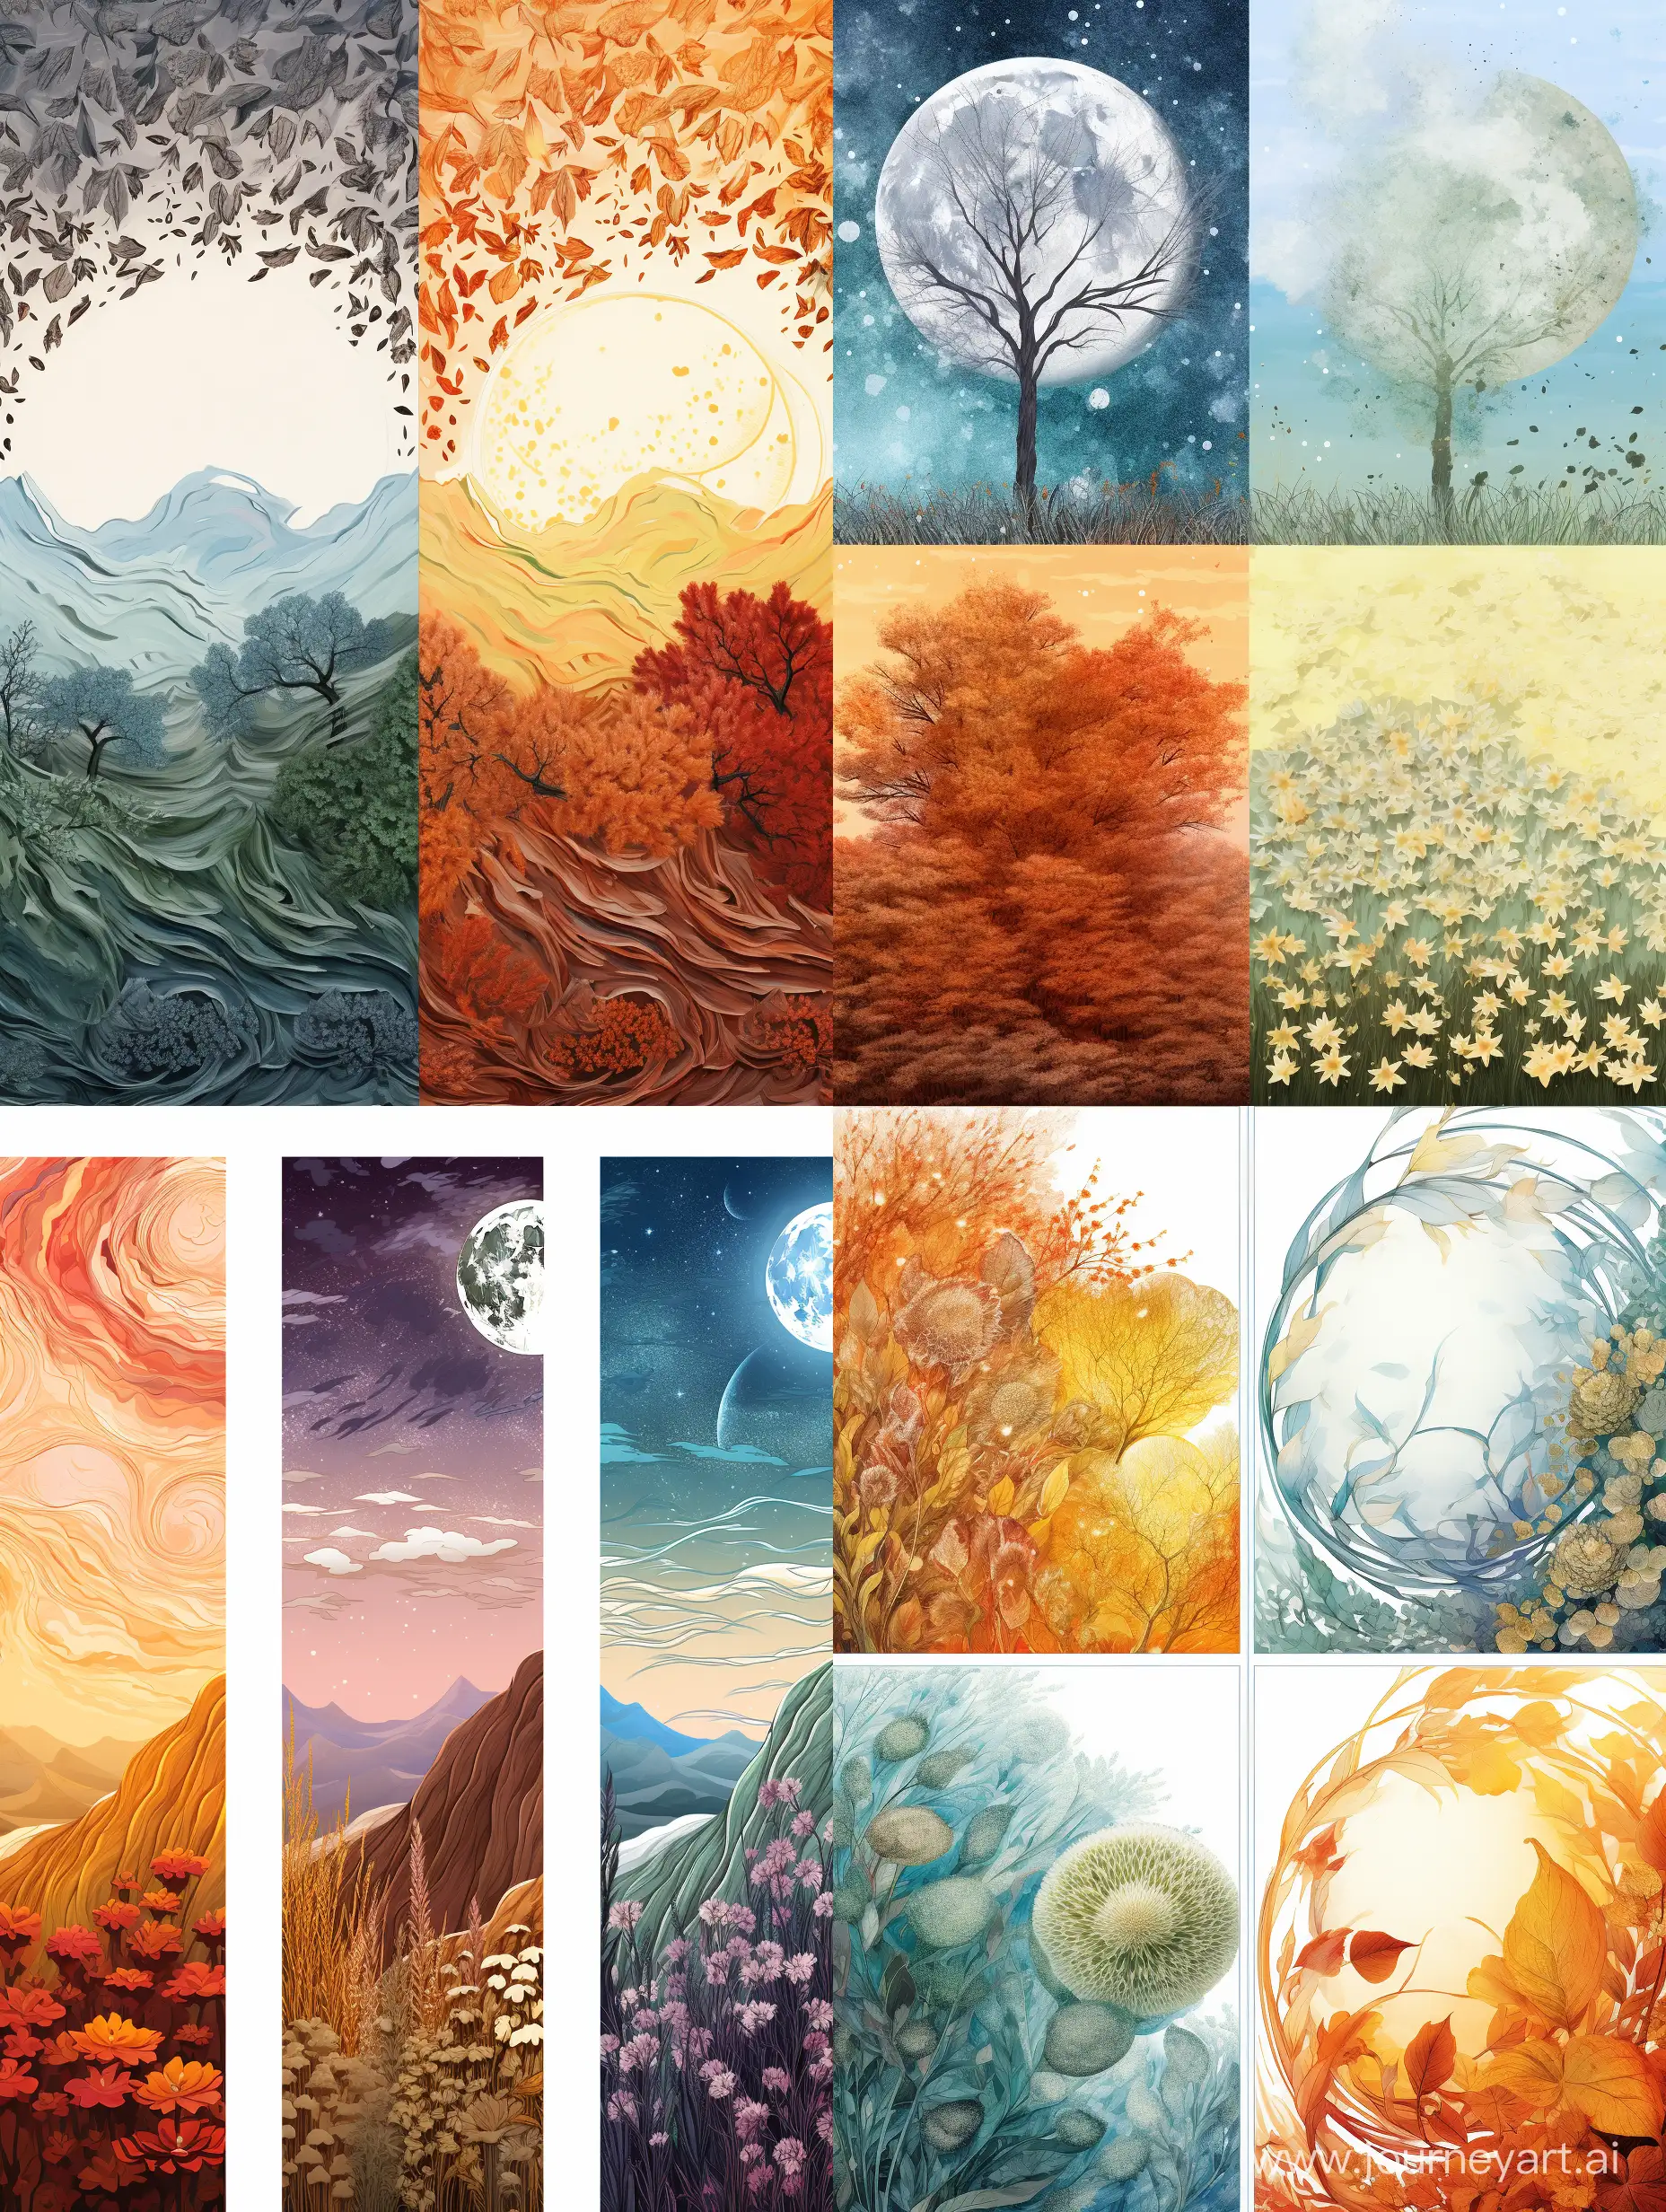 Seasonal-Textures-Vibrant-Graphic-Design-for-Cards